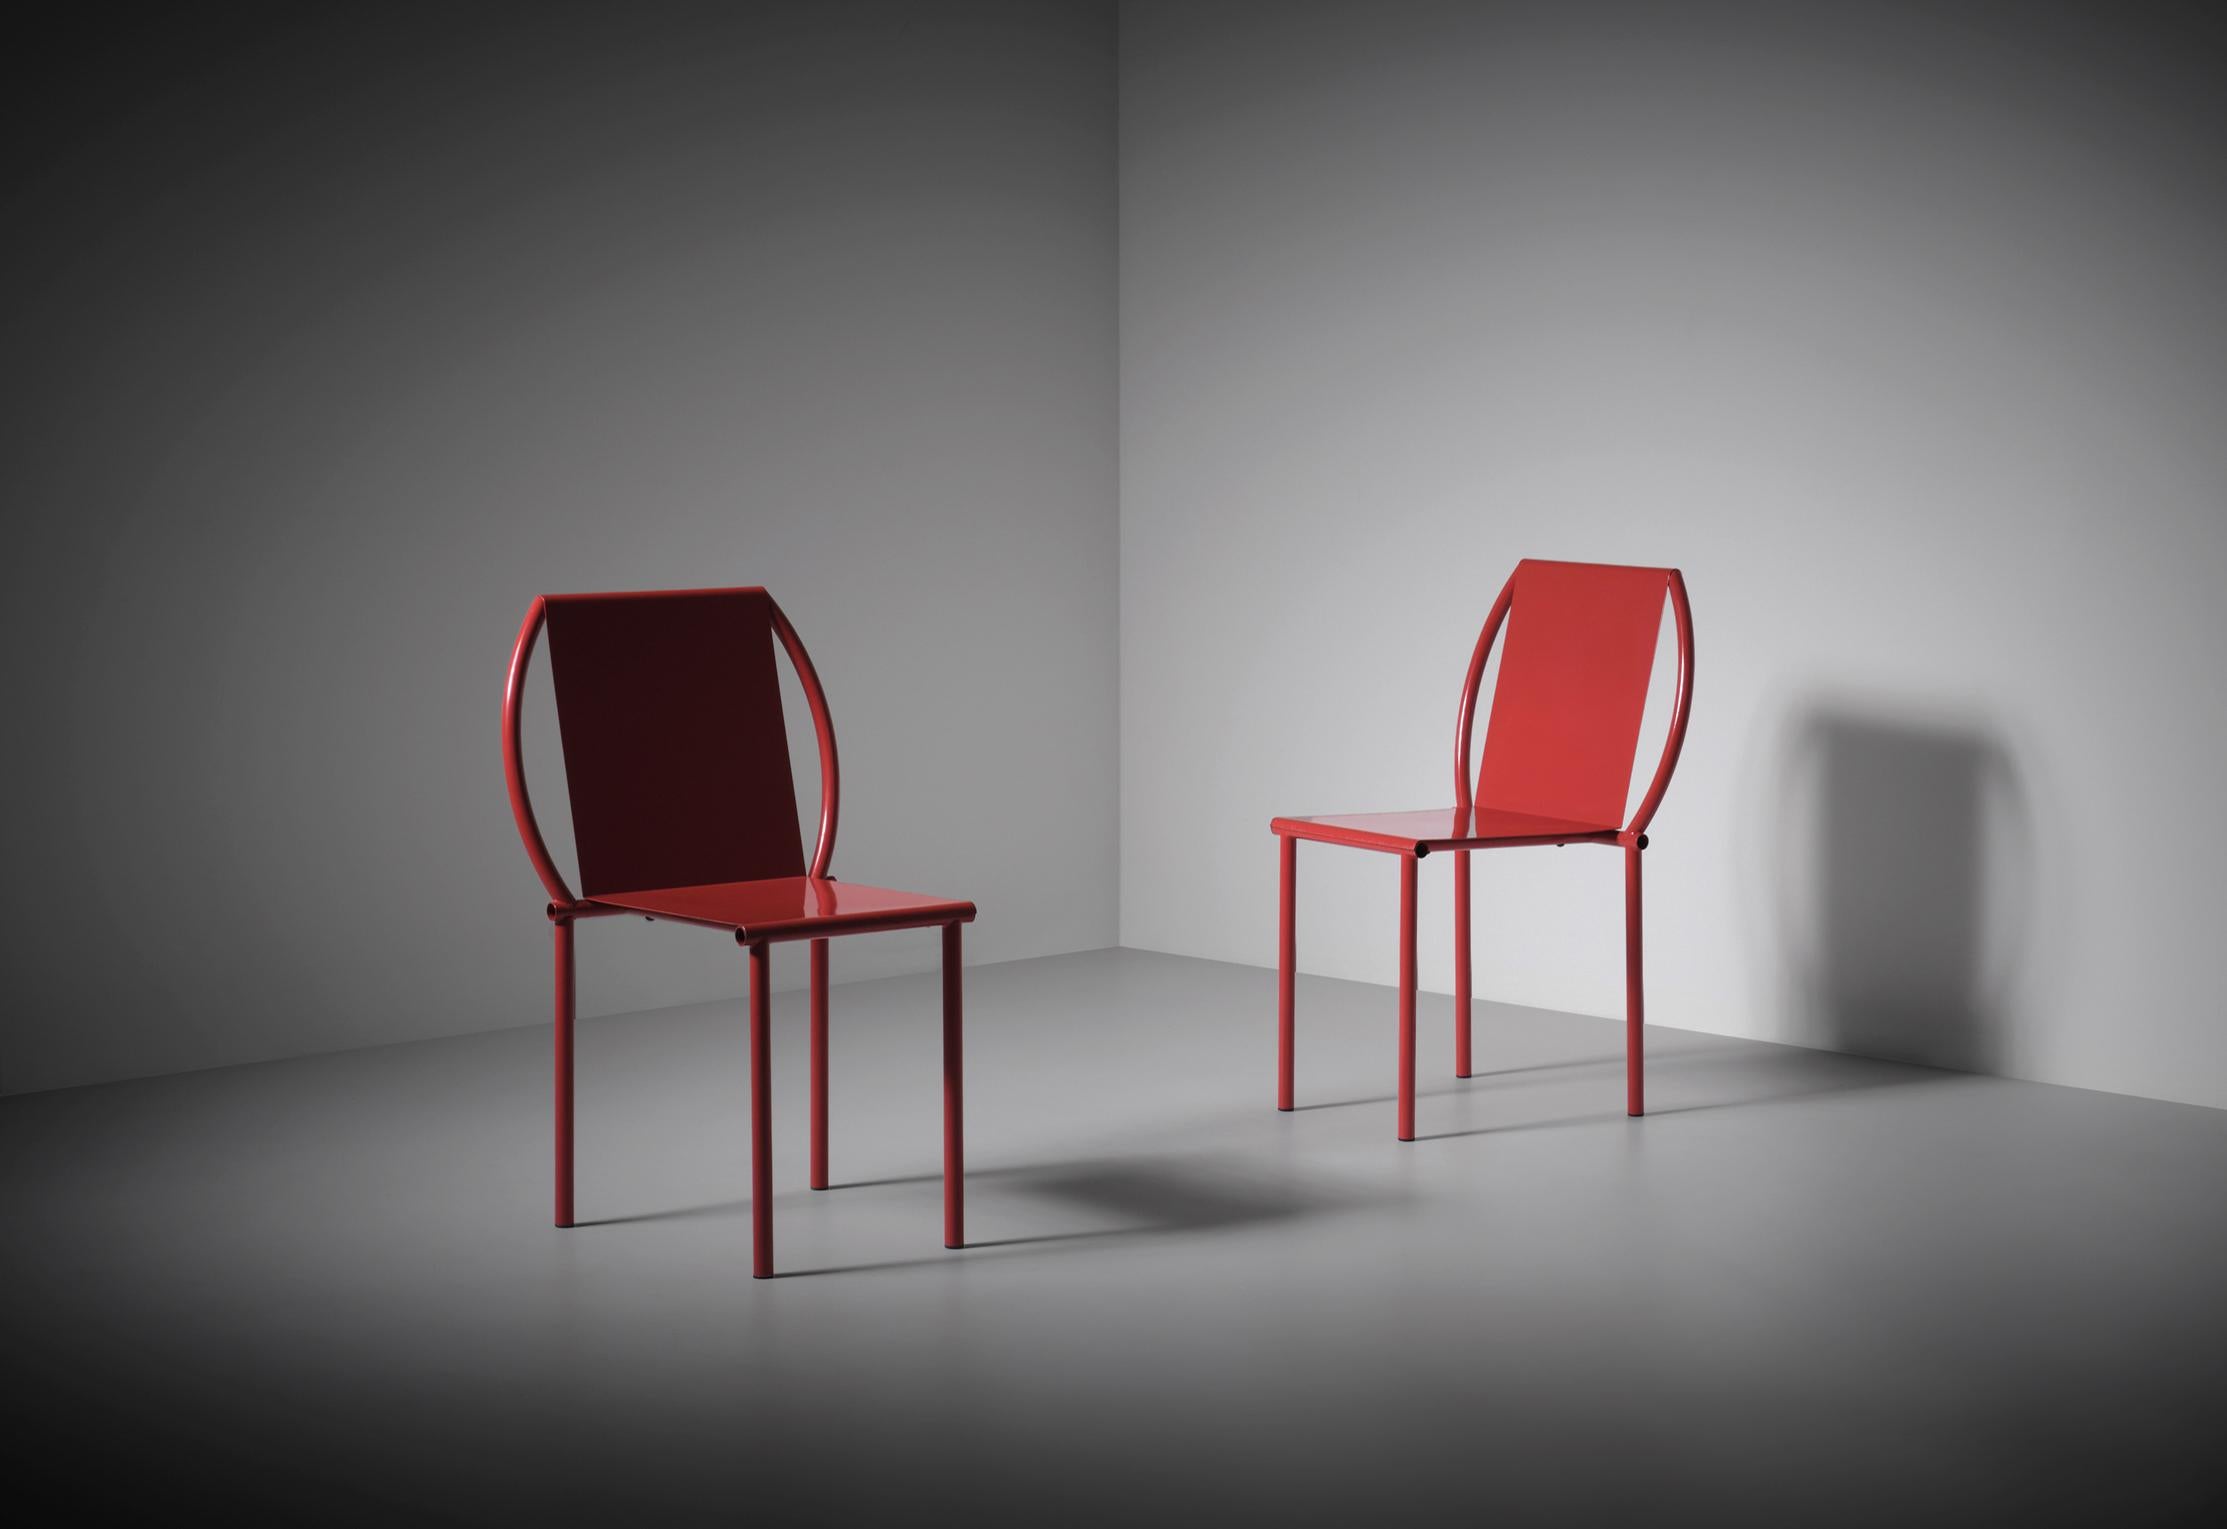 Pair of 'Toro' chairs by Martin Szekely, France 1987. The chairs were produced by Néotù gallery in a limited number of 200 examples. Minimal tubular and folded sheet steel frames finished with their original bright red lacquer. The combination of